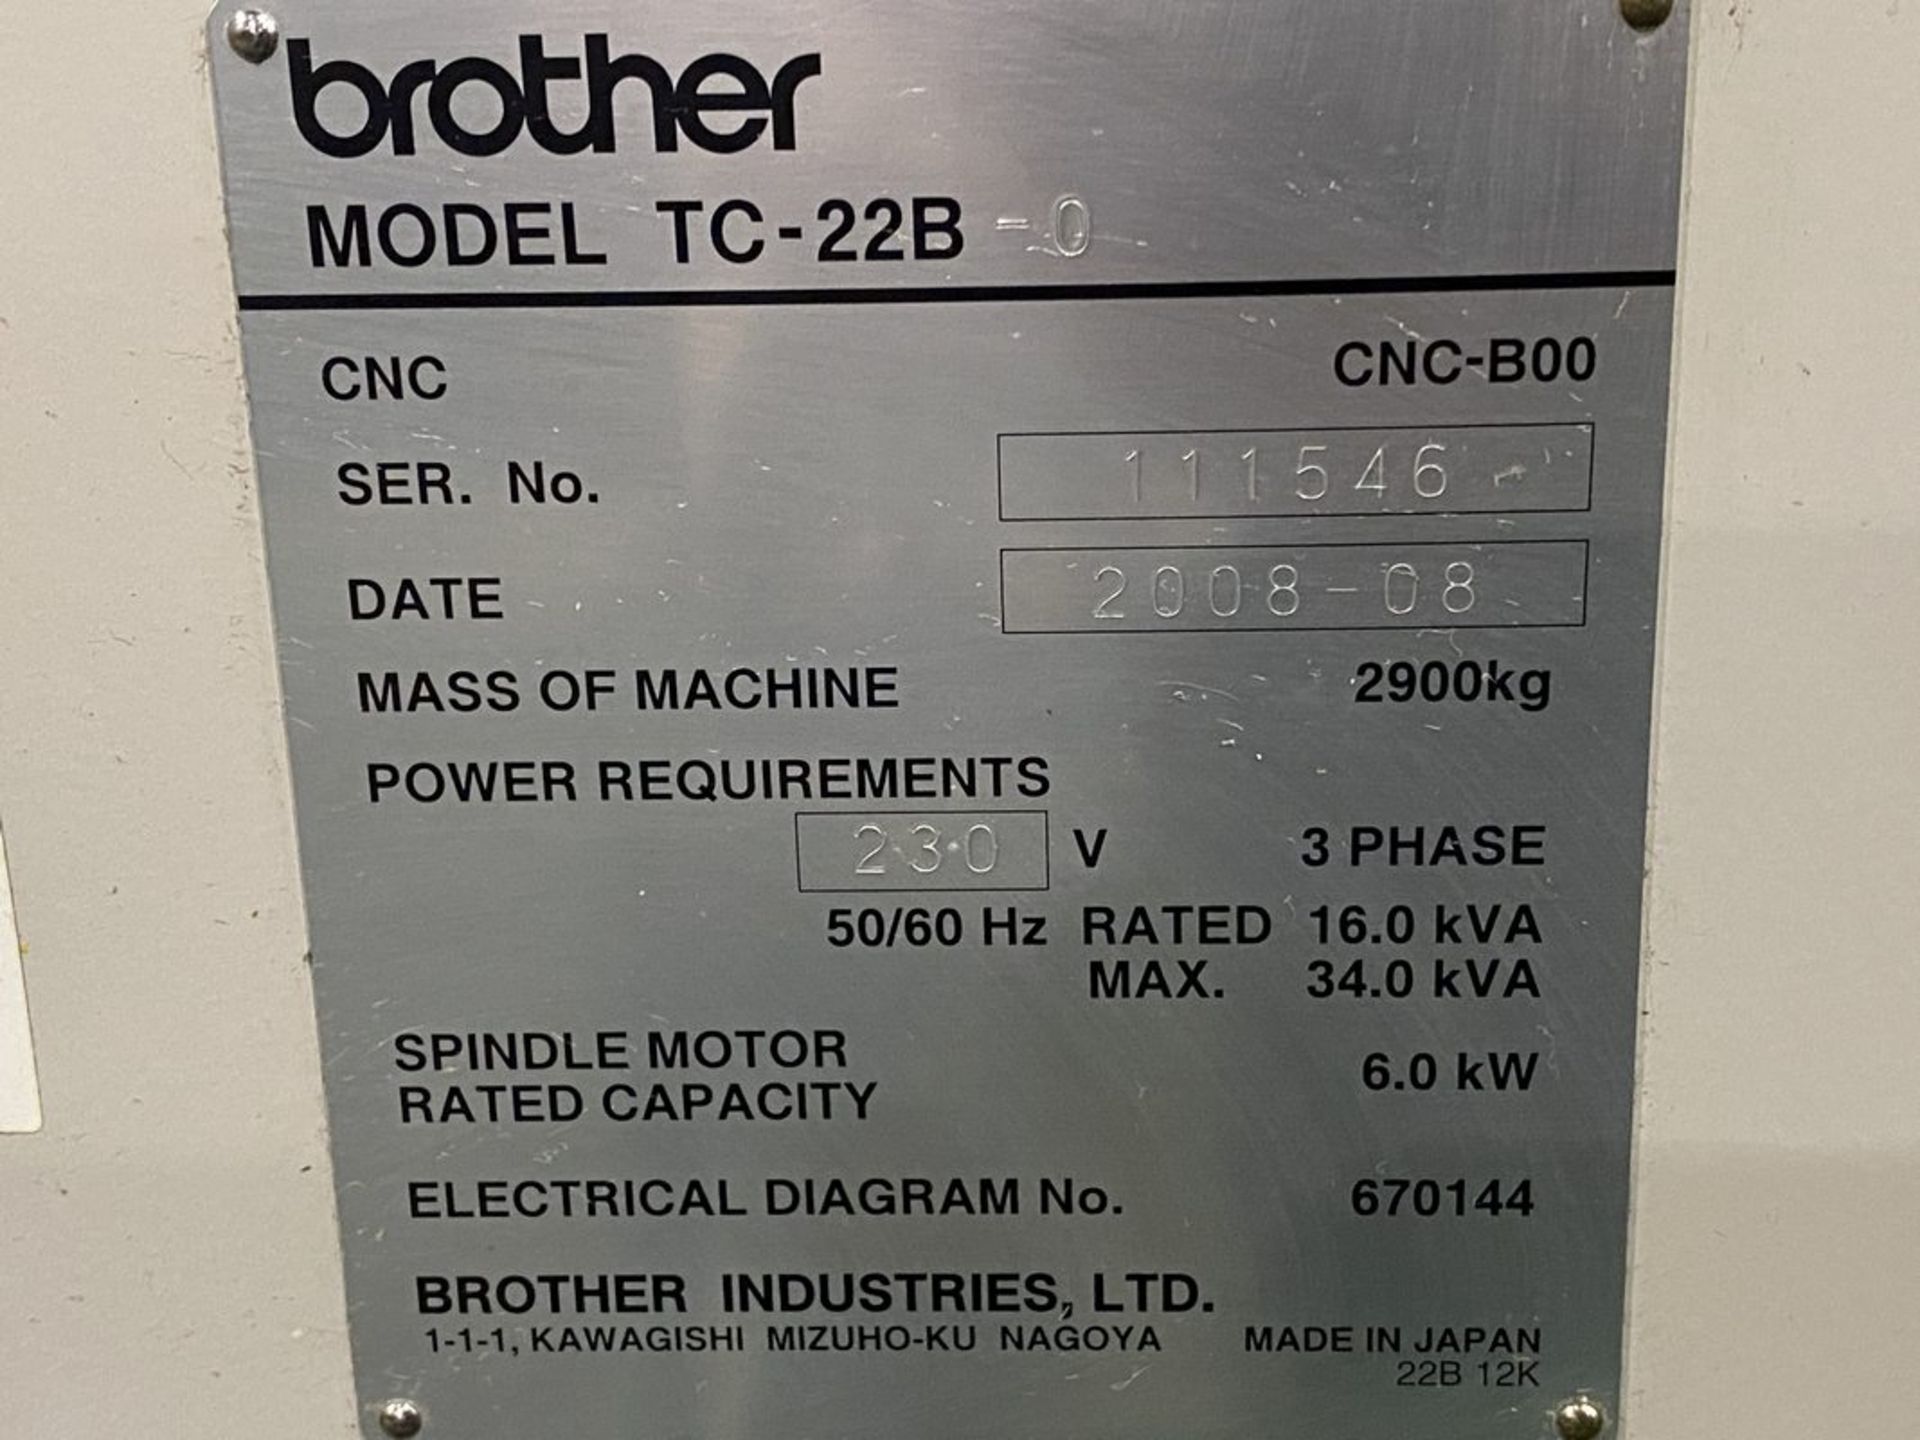 Brother TC-22B-0 4-Axis CNC Tapping Center - Image 12 of 12